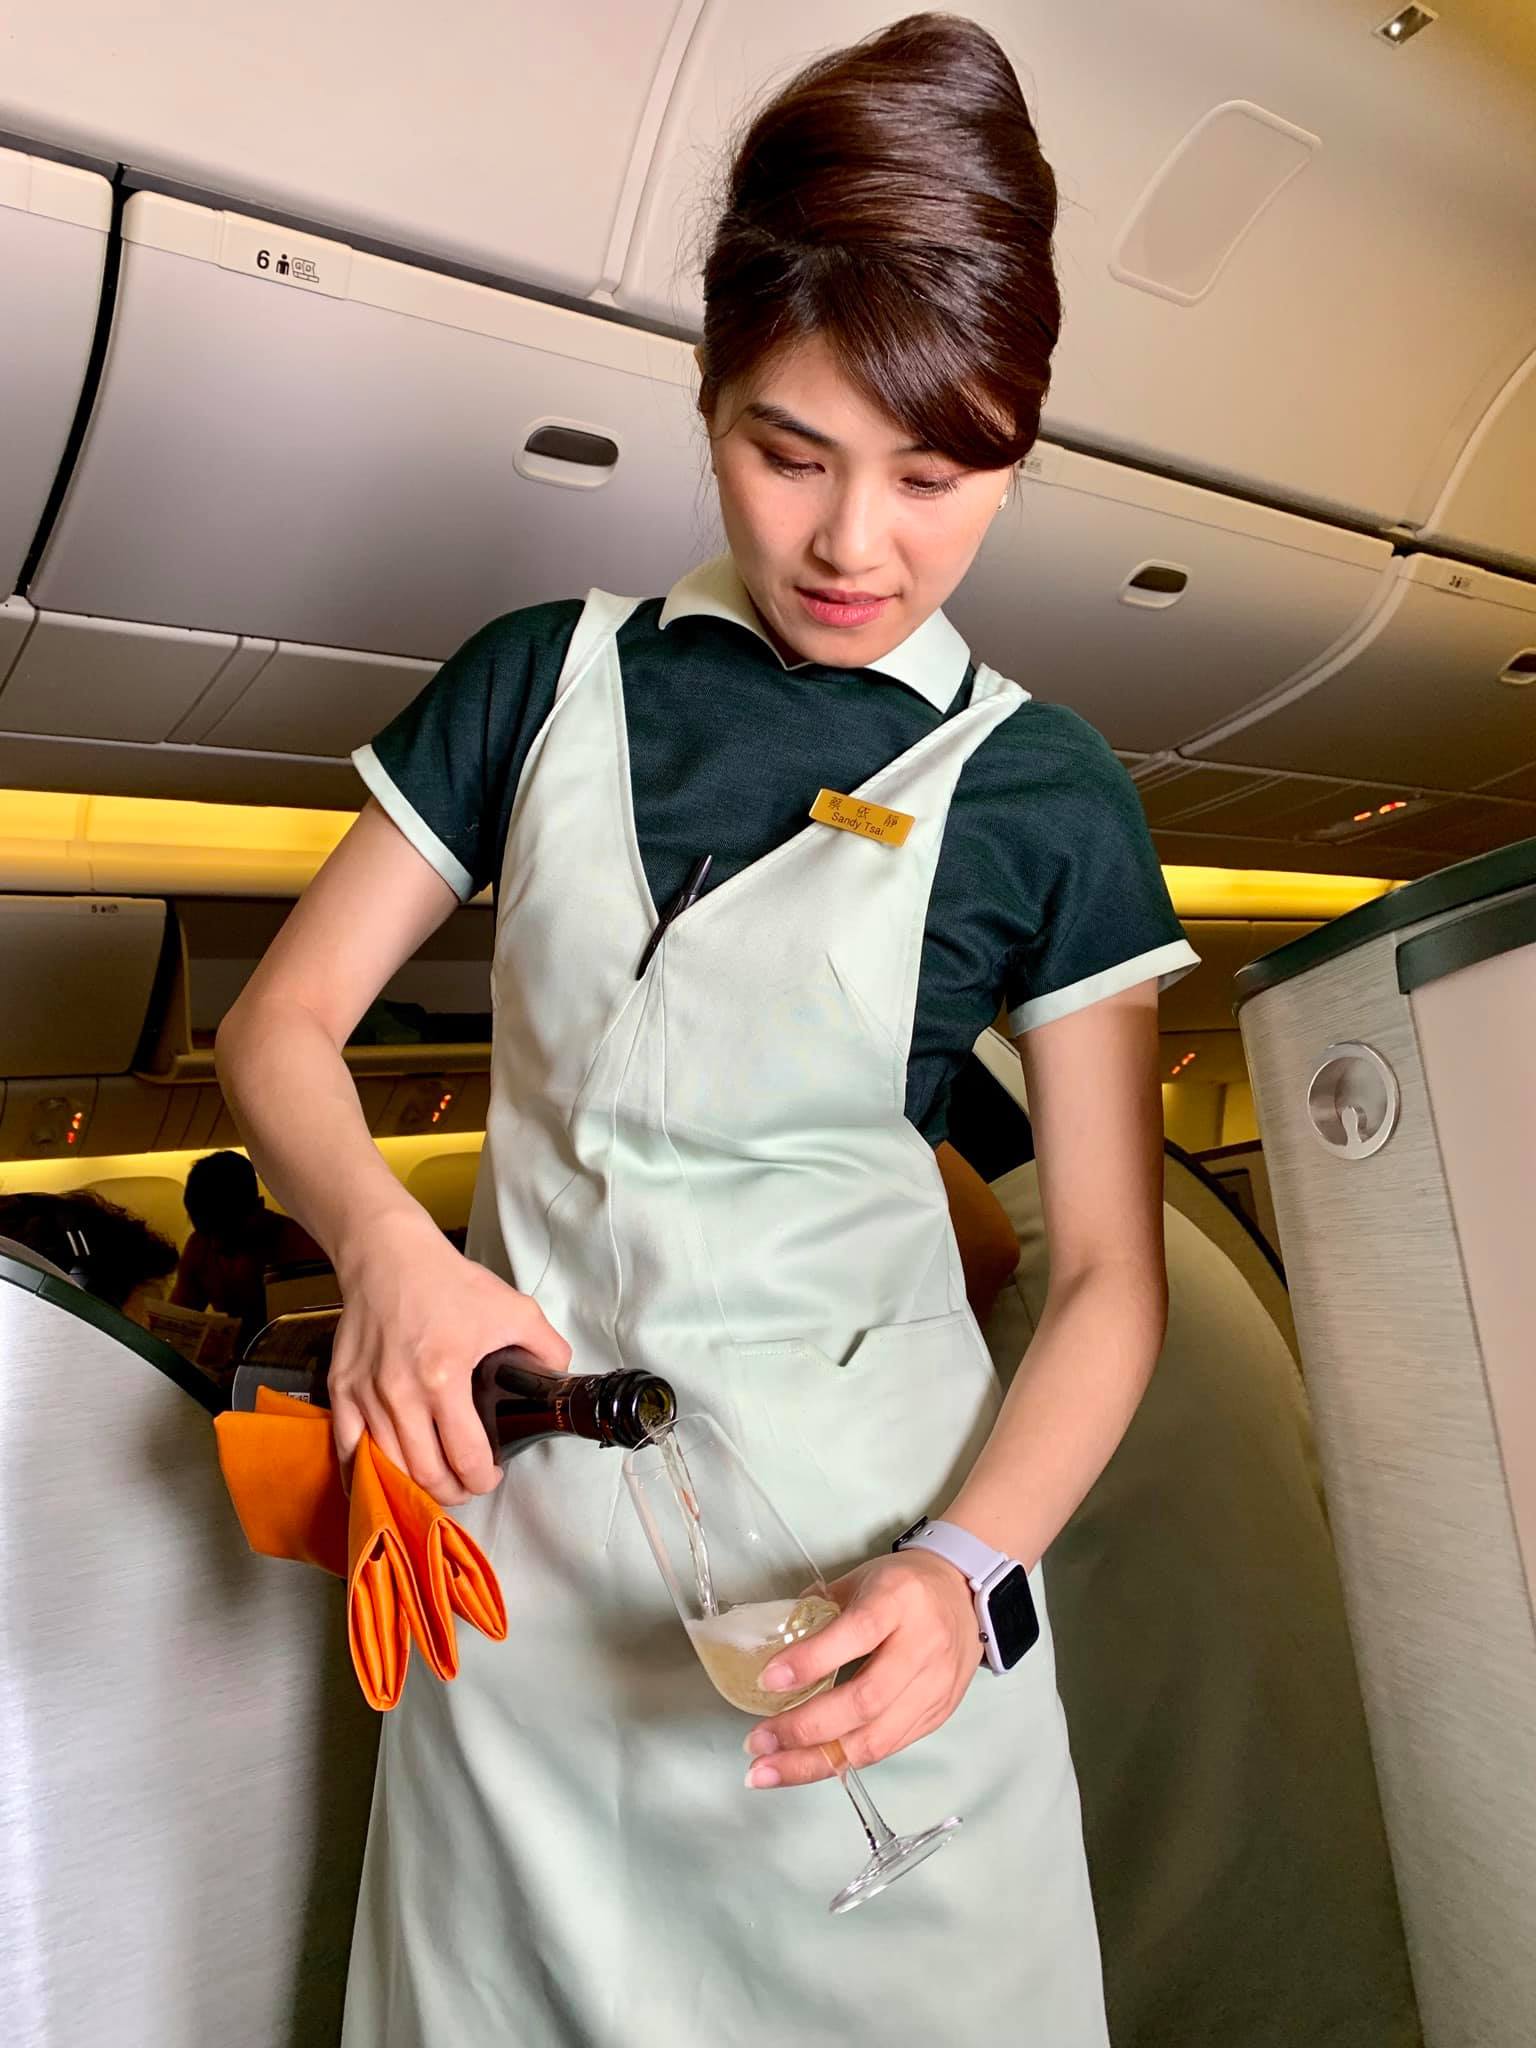 Kach Solo Travels in 2019 Fying Business Class from Bangkok, Thailand to London, UK22.jpg